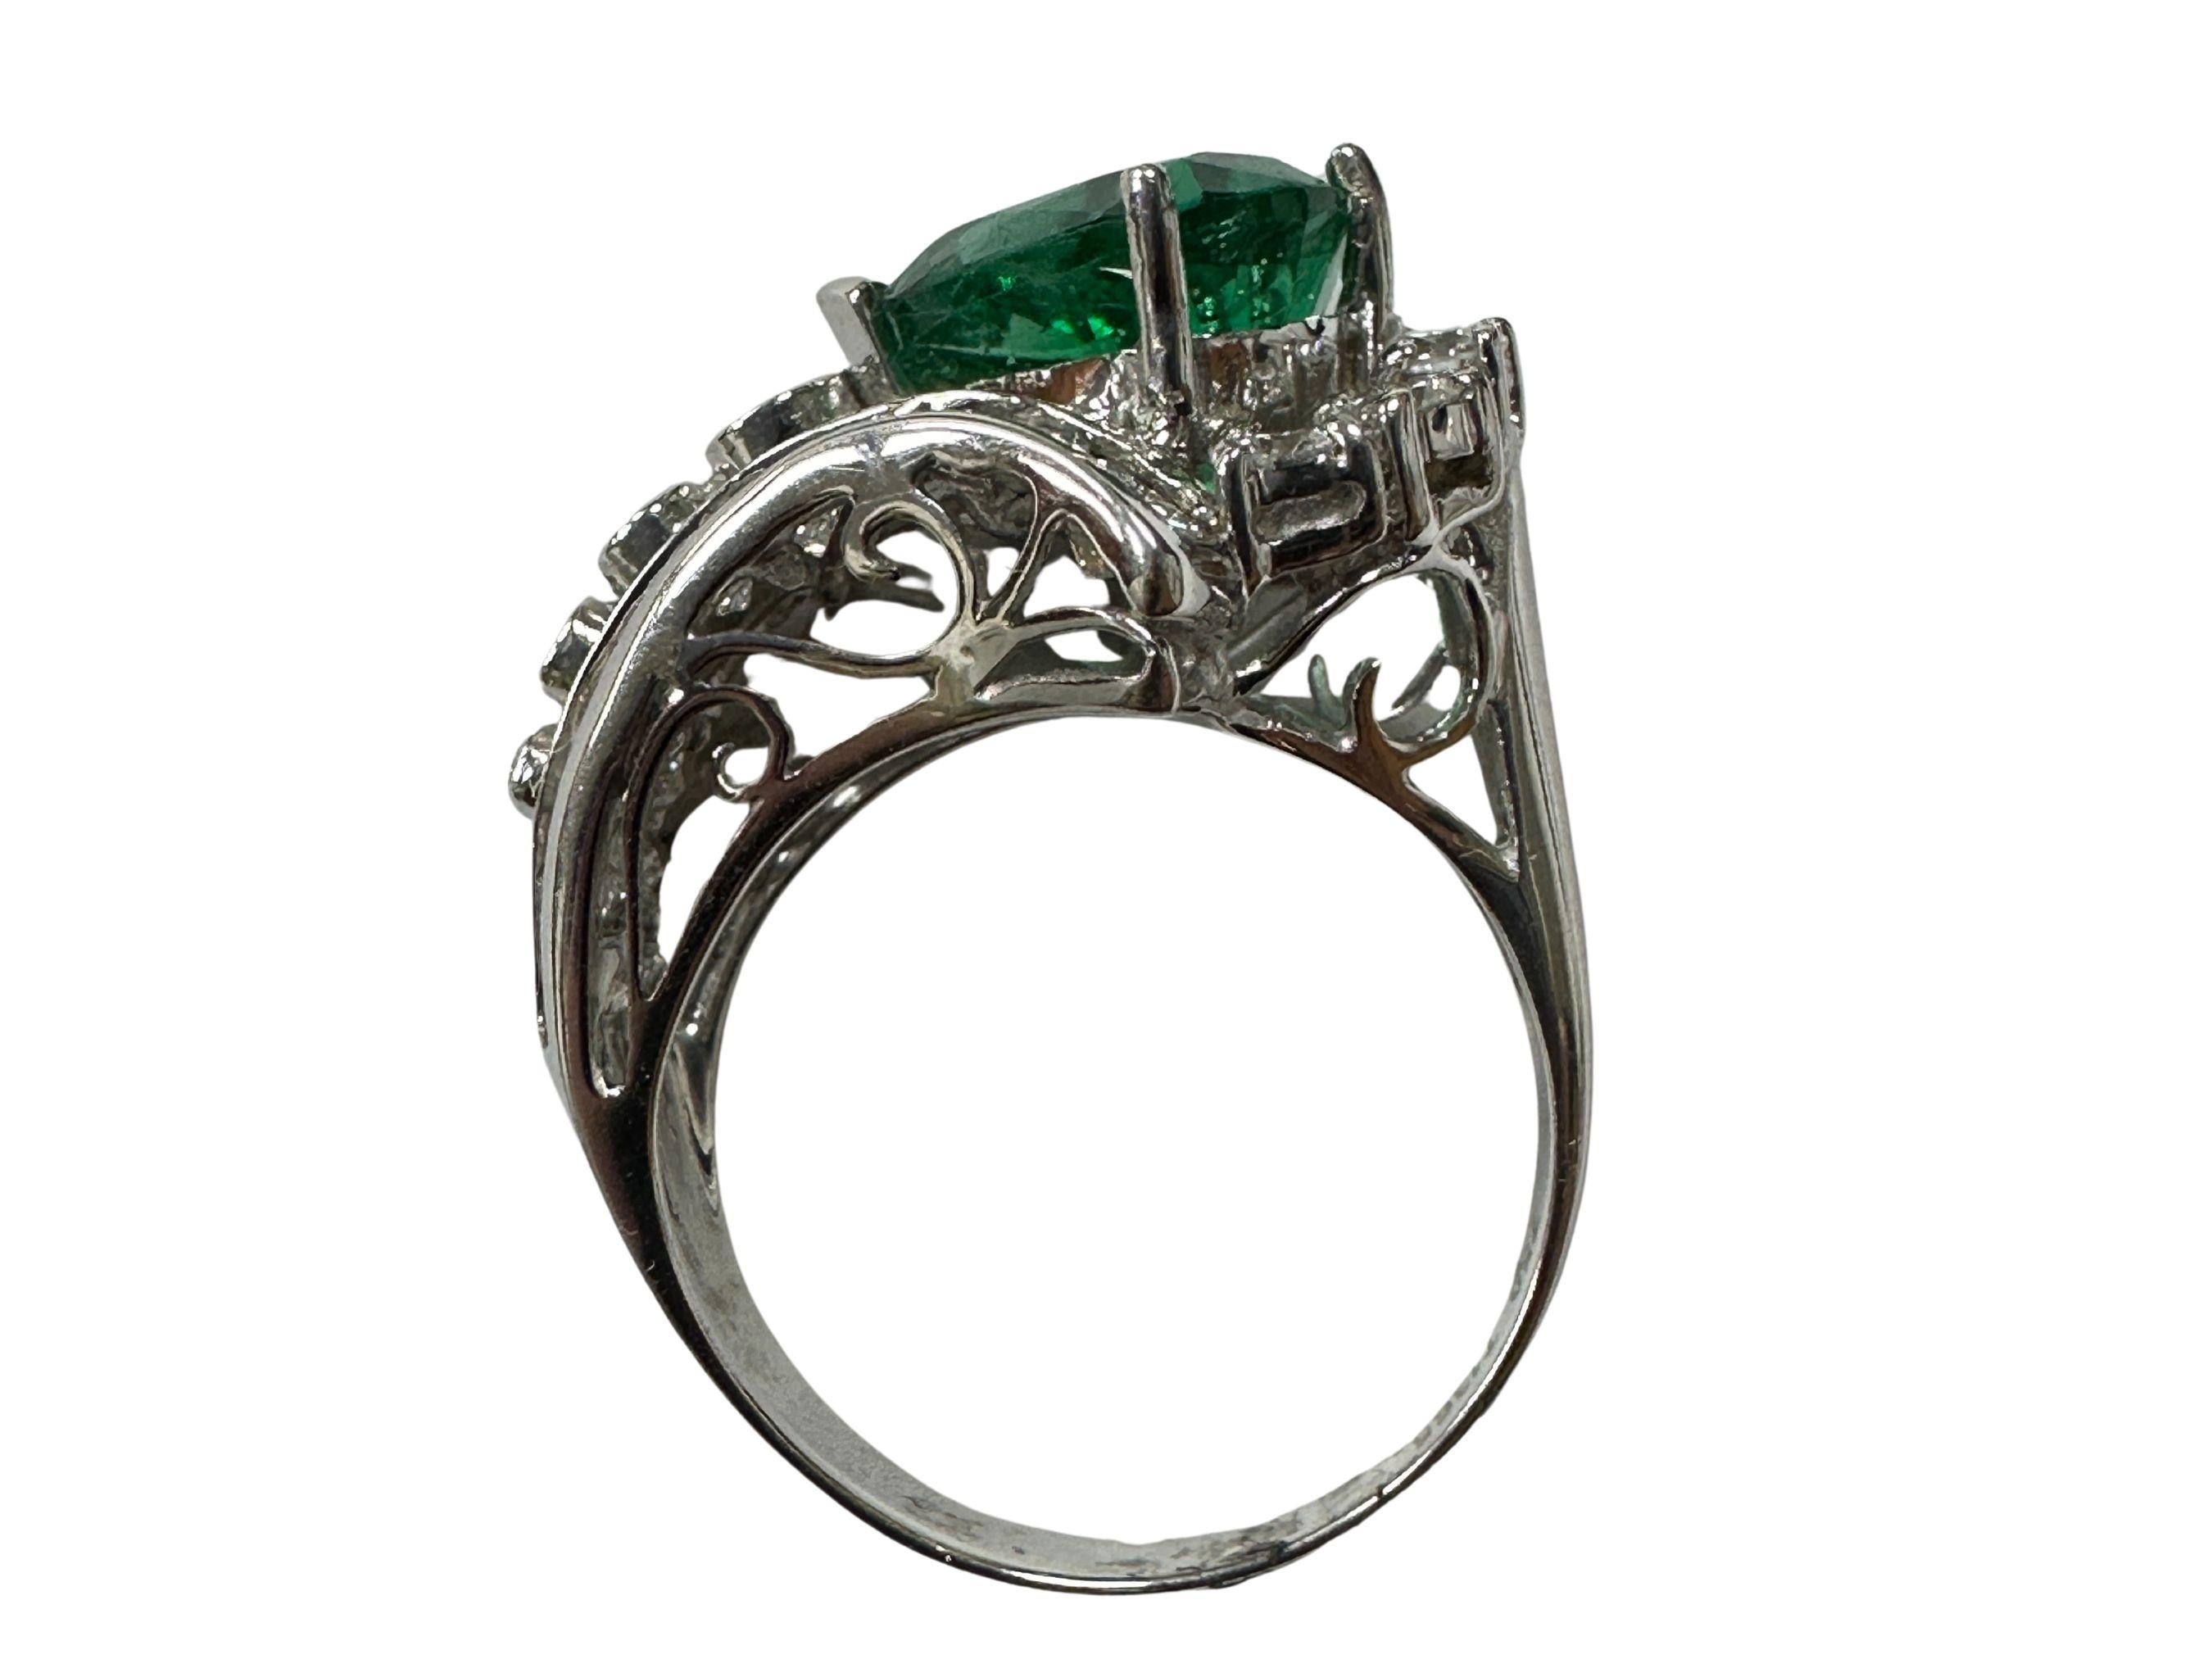 Indulge in the timeless allure of this 18k Diamond and Pear Shaped Emerald Ring, a stunning vintage piece in very good condition with minor surface wear consistent with its rich history.

Crafted in 18k white gold, weighing 7.33 grams, this ring